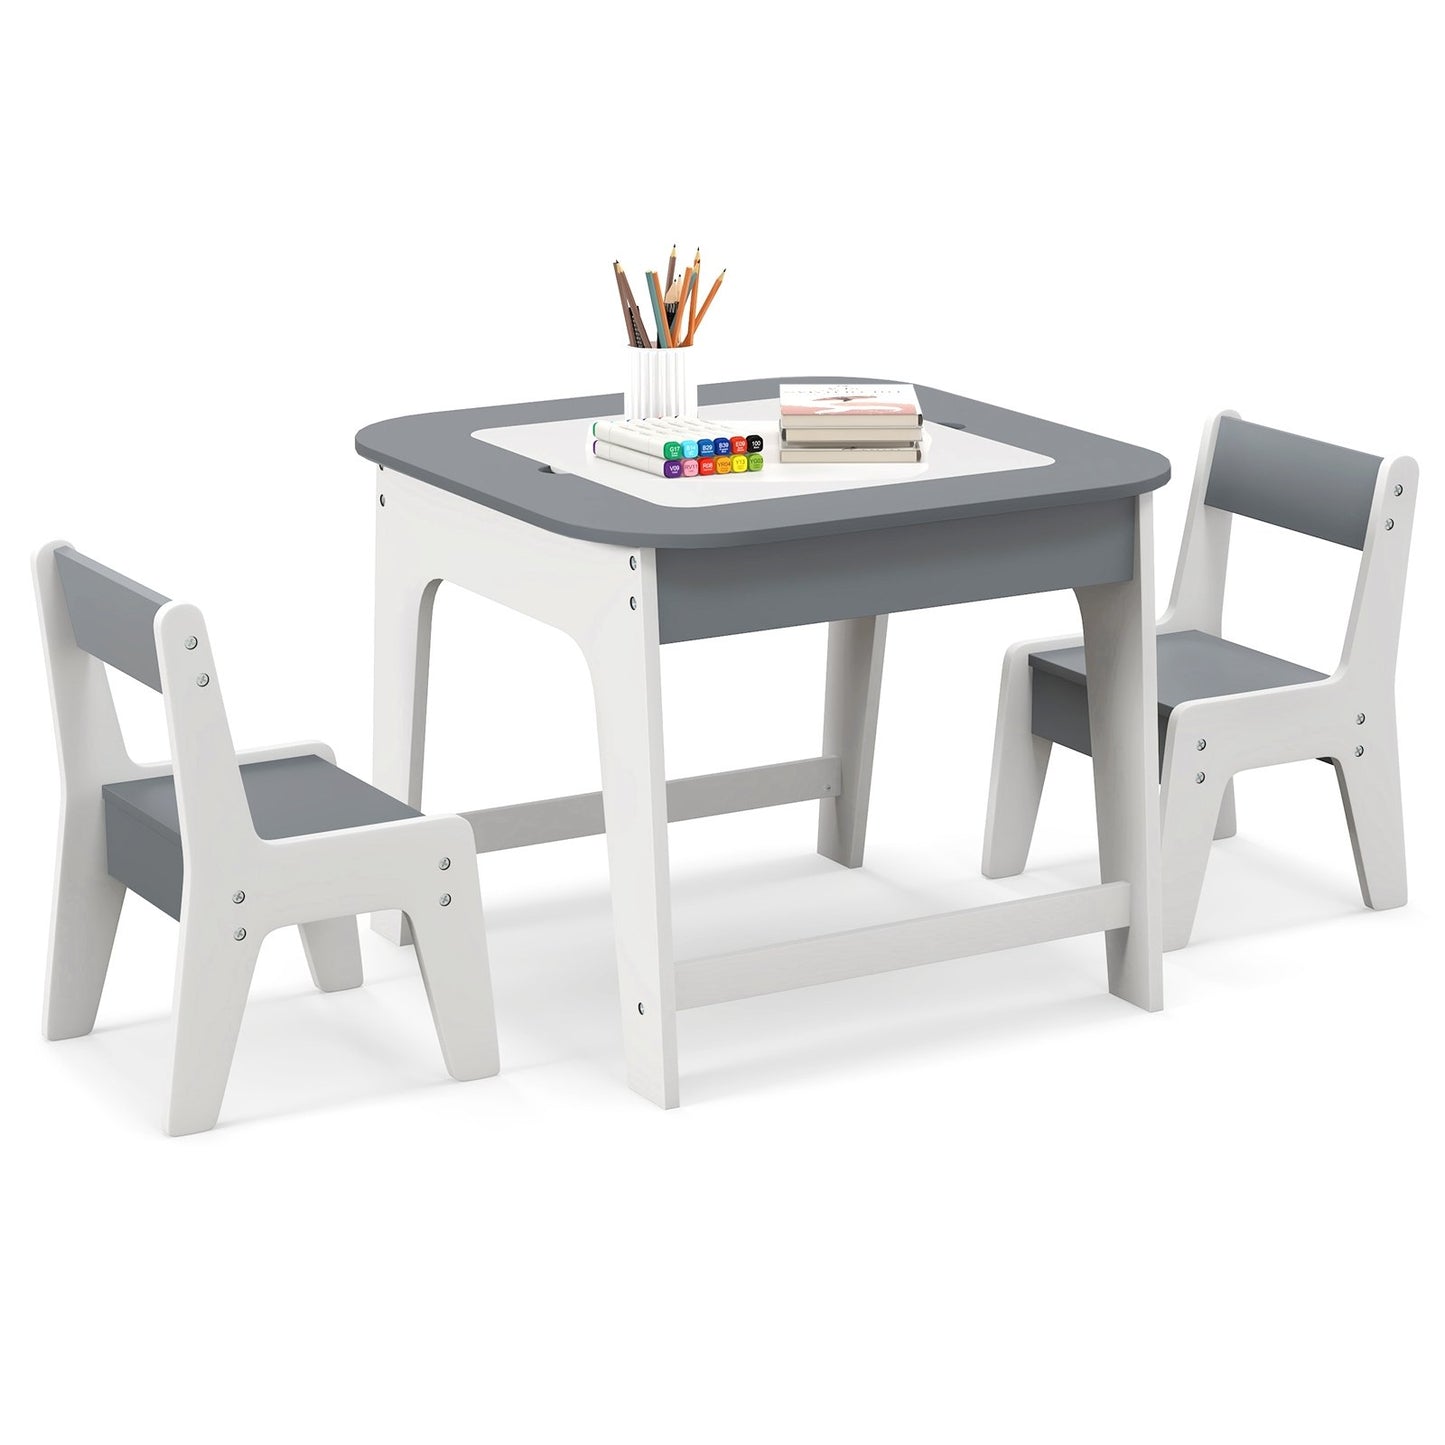 Kid's Table and Chairs Set with Double-sized Tabletop, Gray